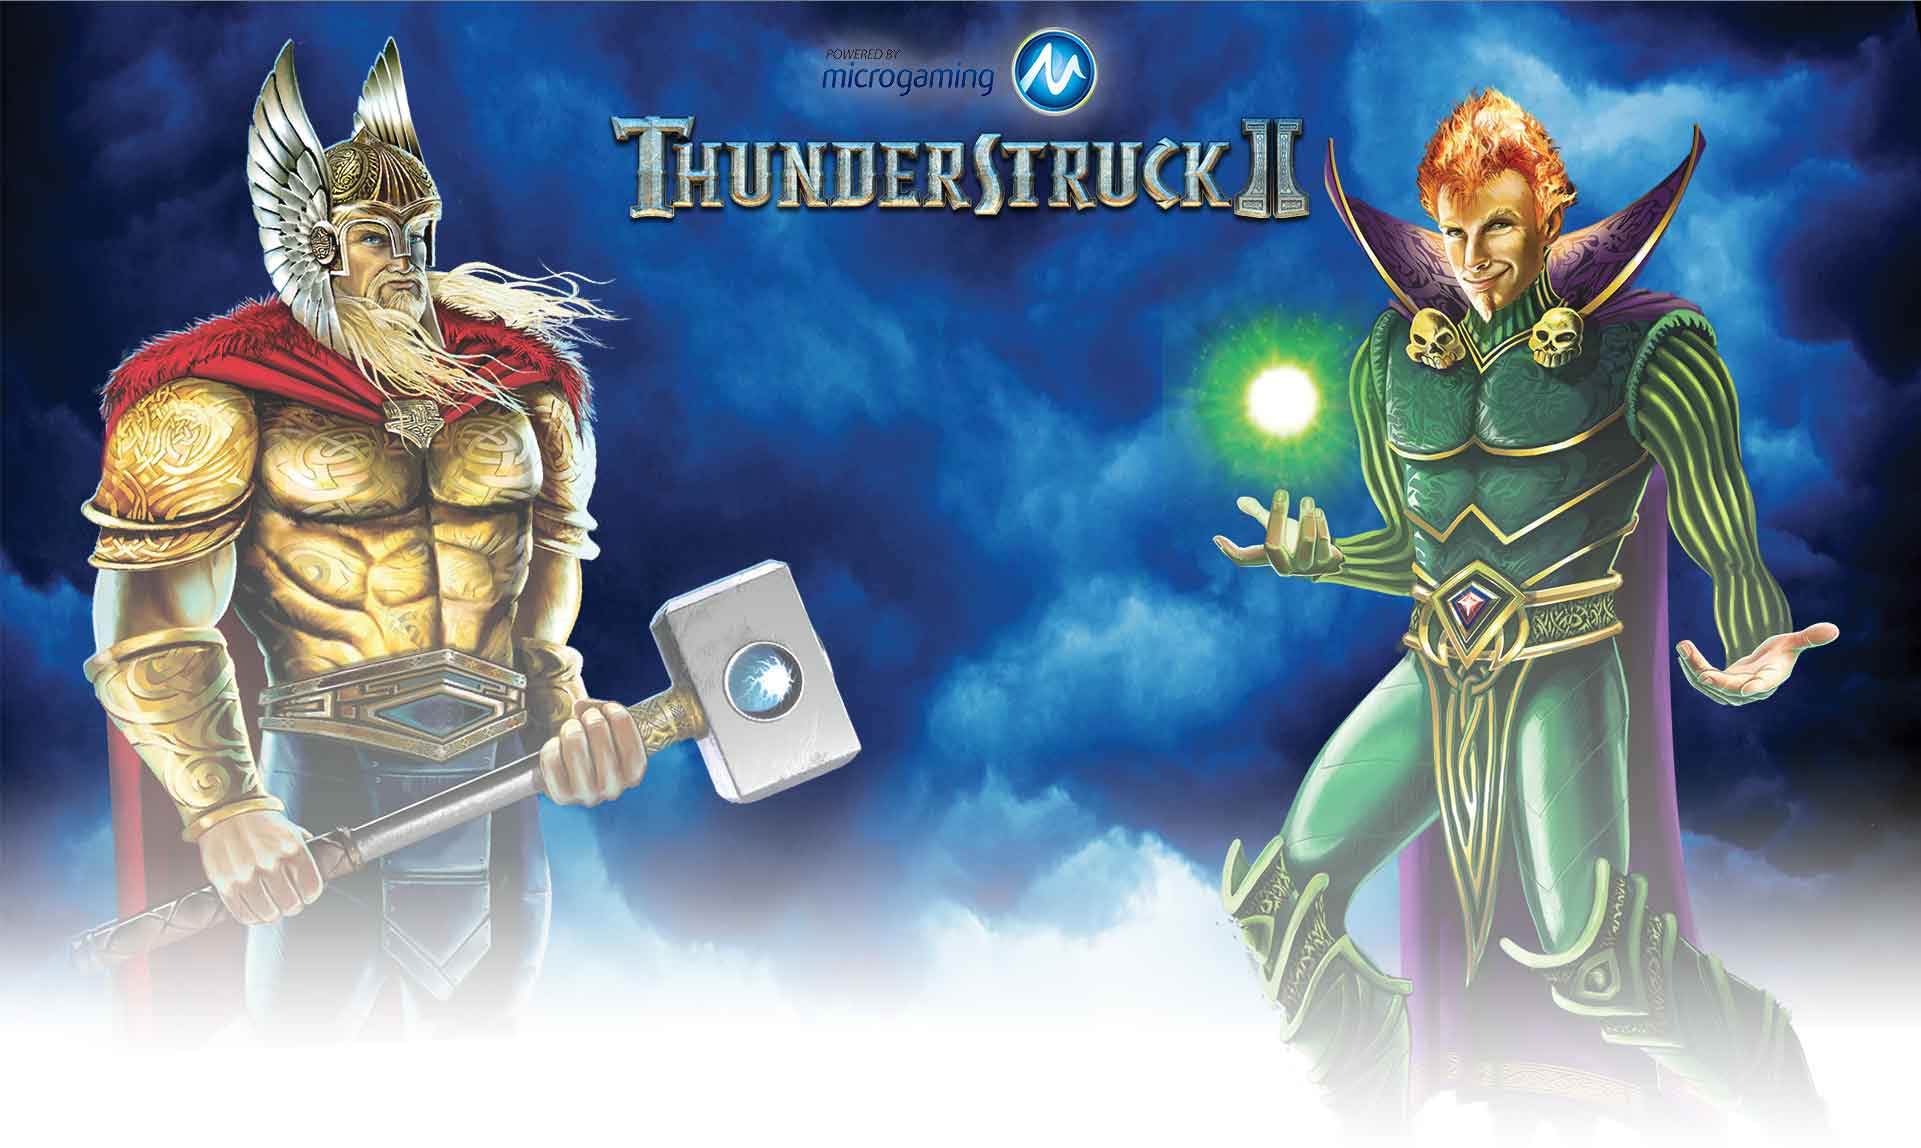 Thunderstruck II Slot – Game and Security Info